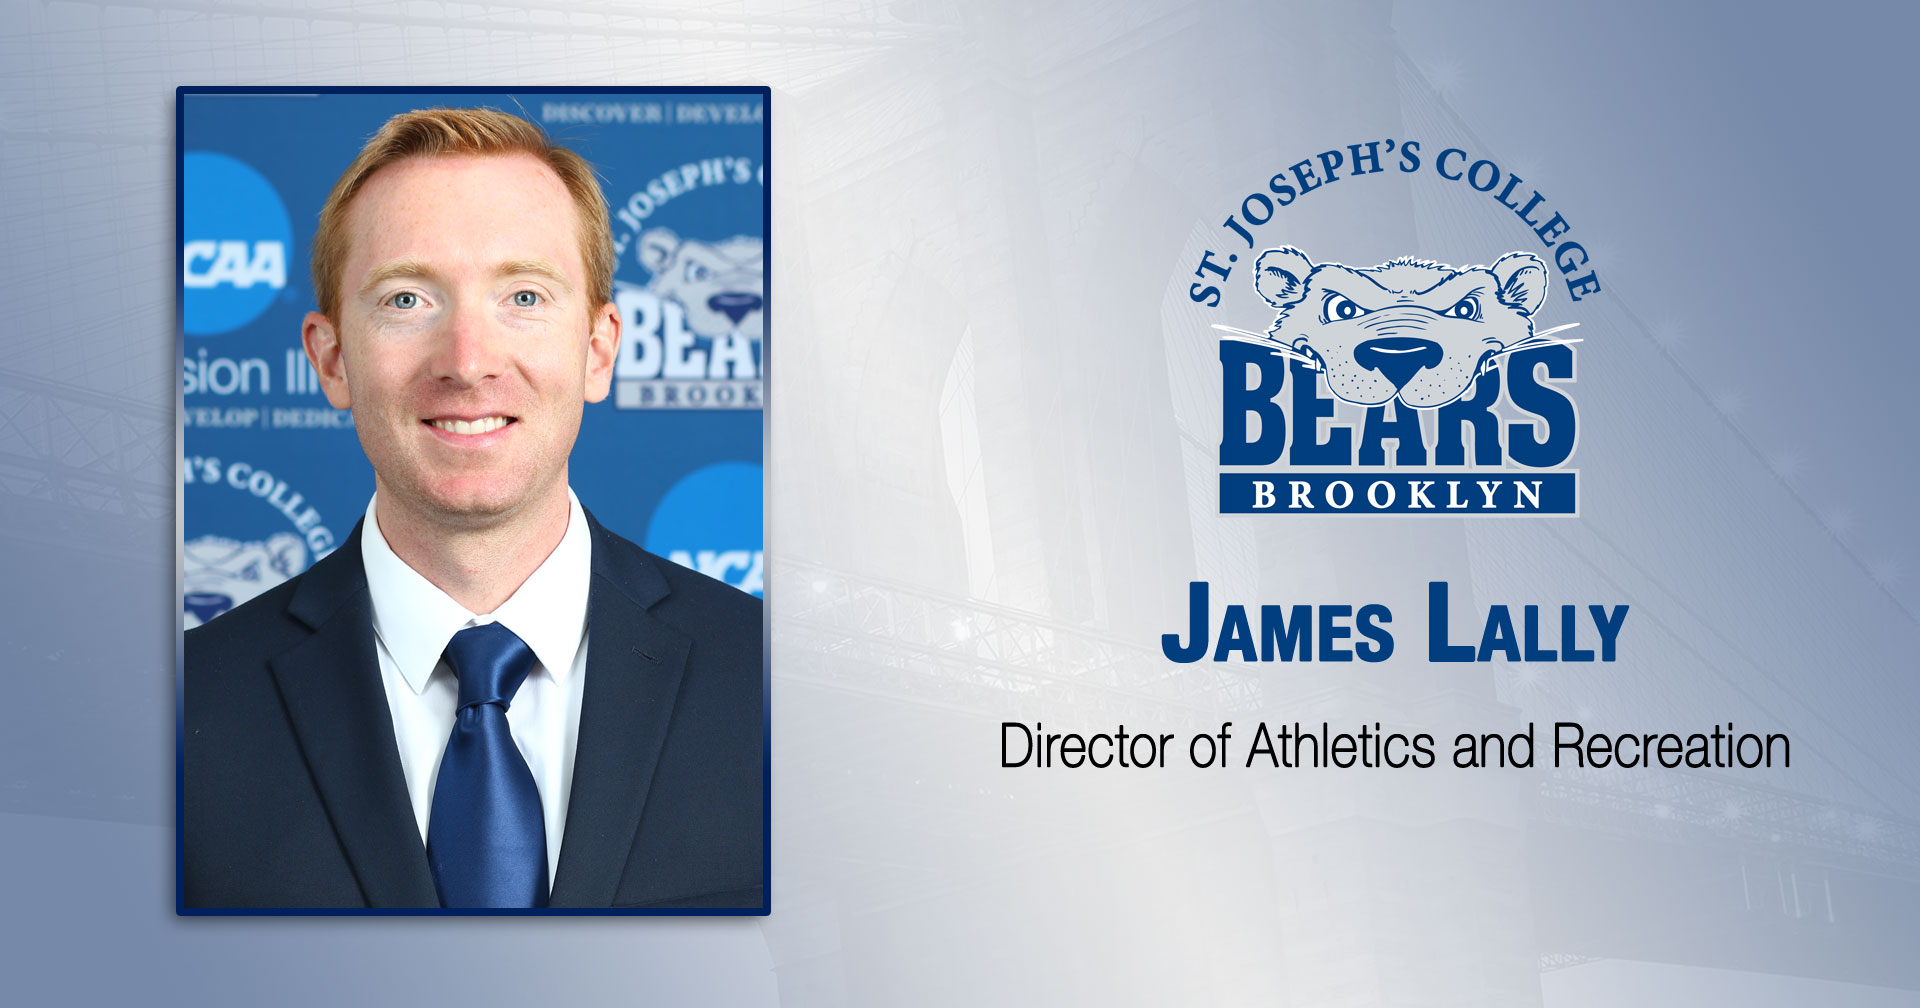 James Lally Appointed Director of Athletics and Recreation